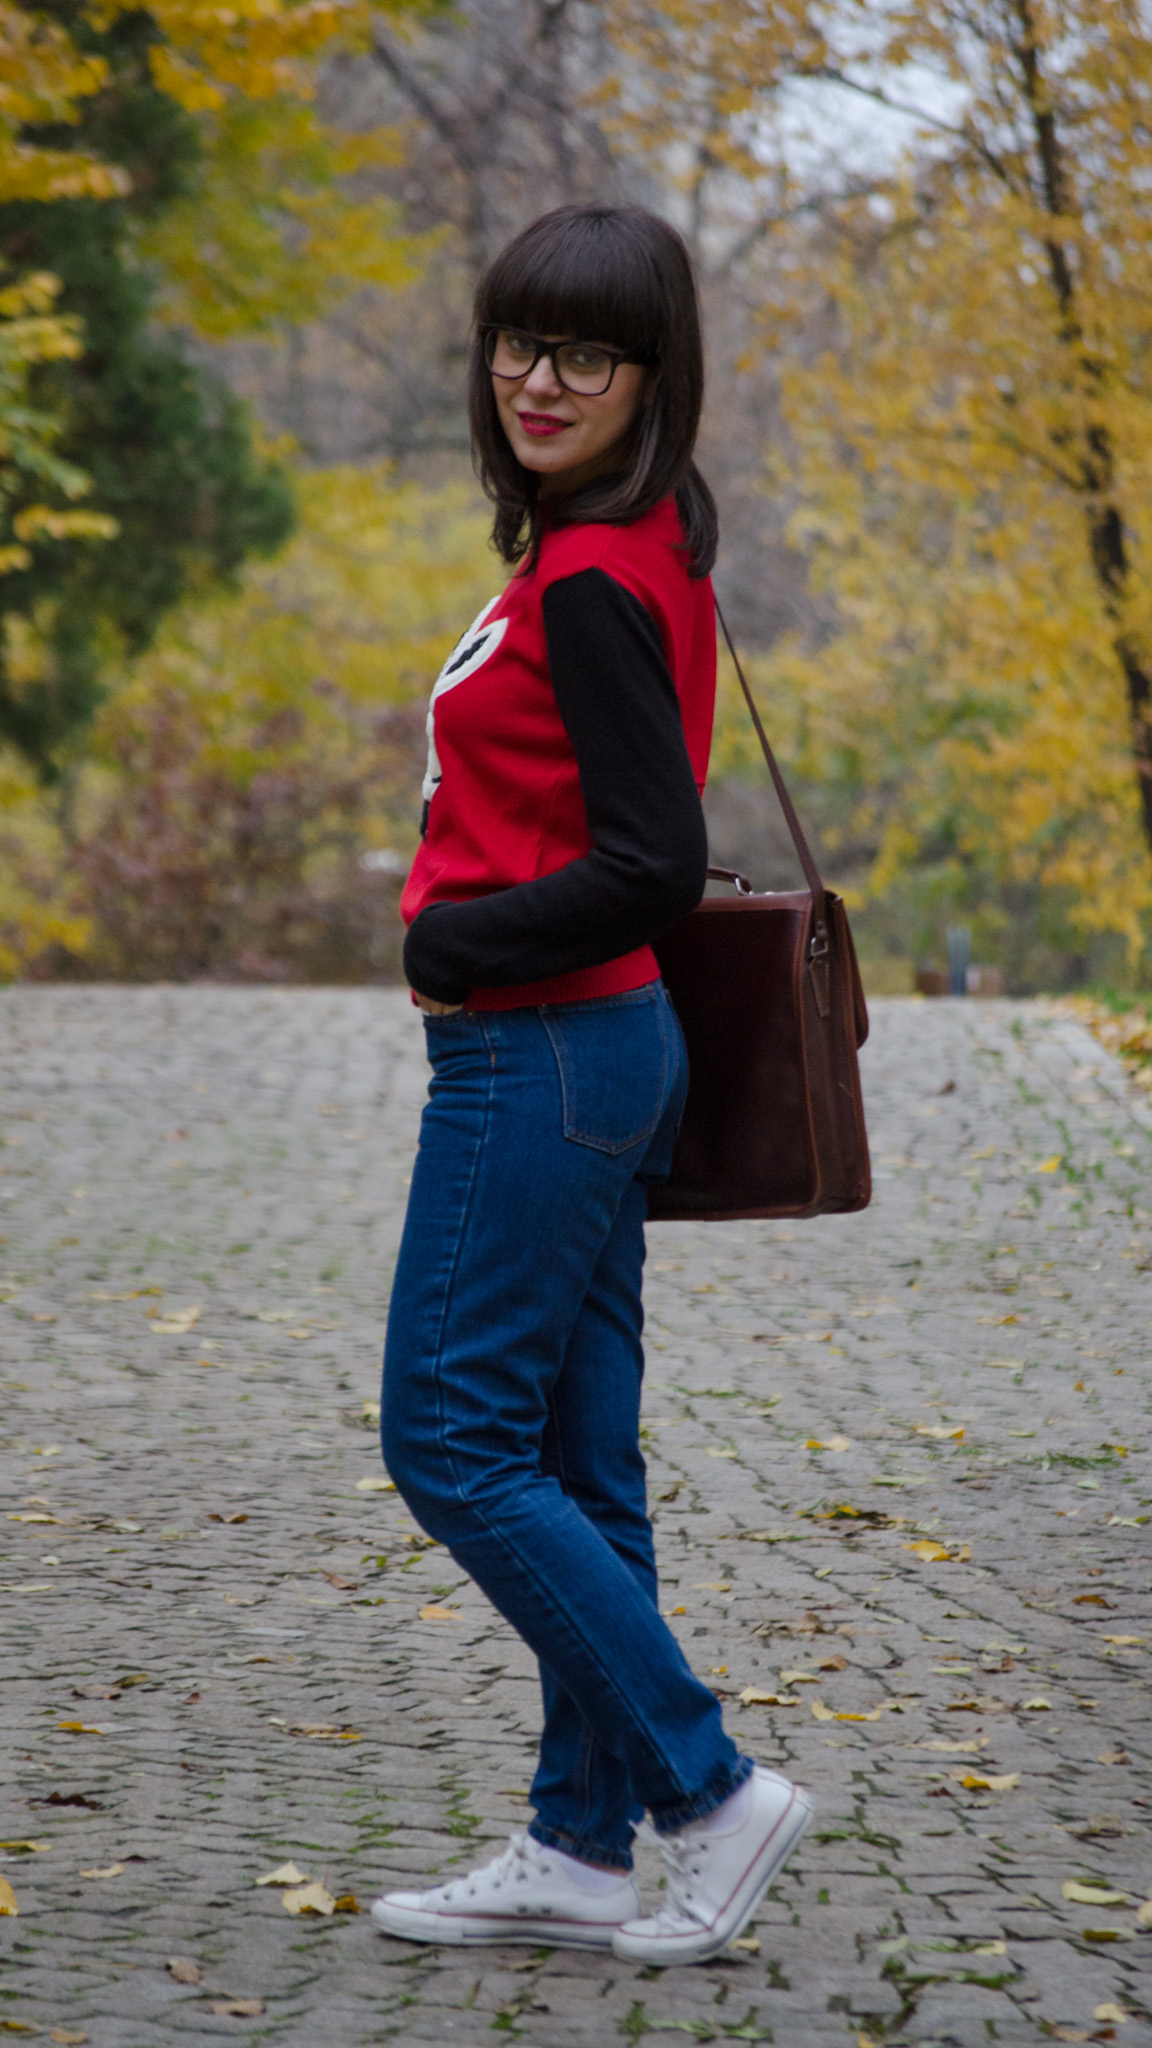 geek style outfit - wabbit season cobalt blue coat geek rabbit sweater koton mom jeans pull&bear thrifted bag satchel brown white converse sneakers glasses bangs autumn fall school outfit dorky